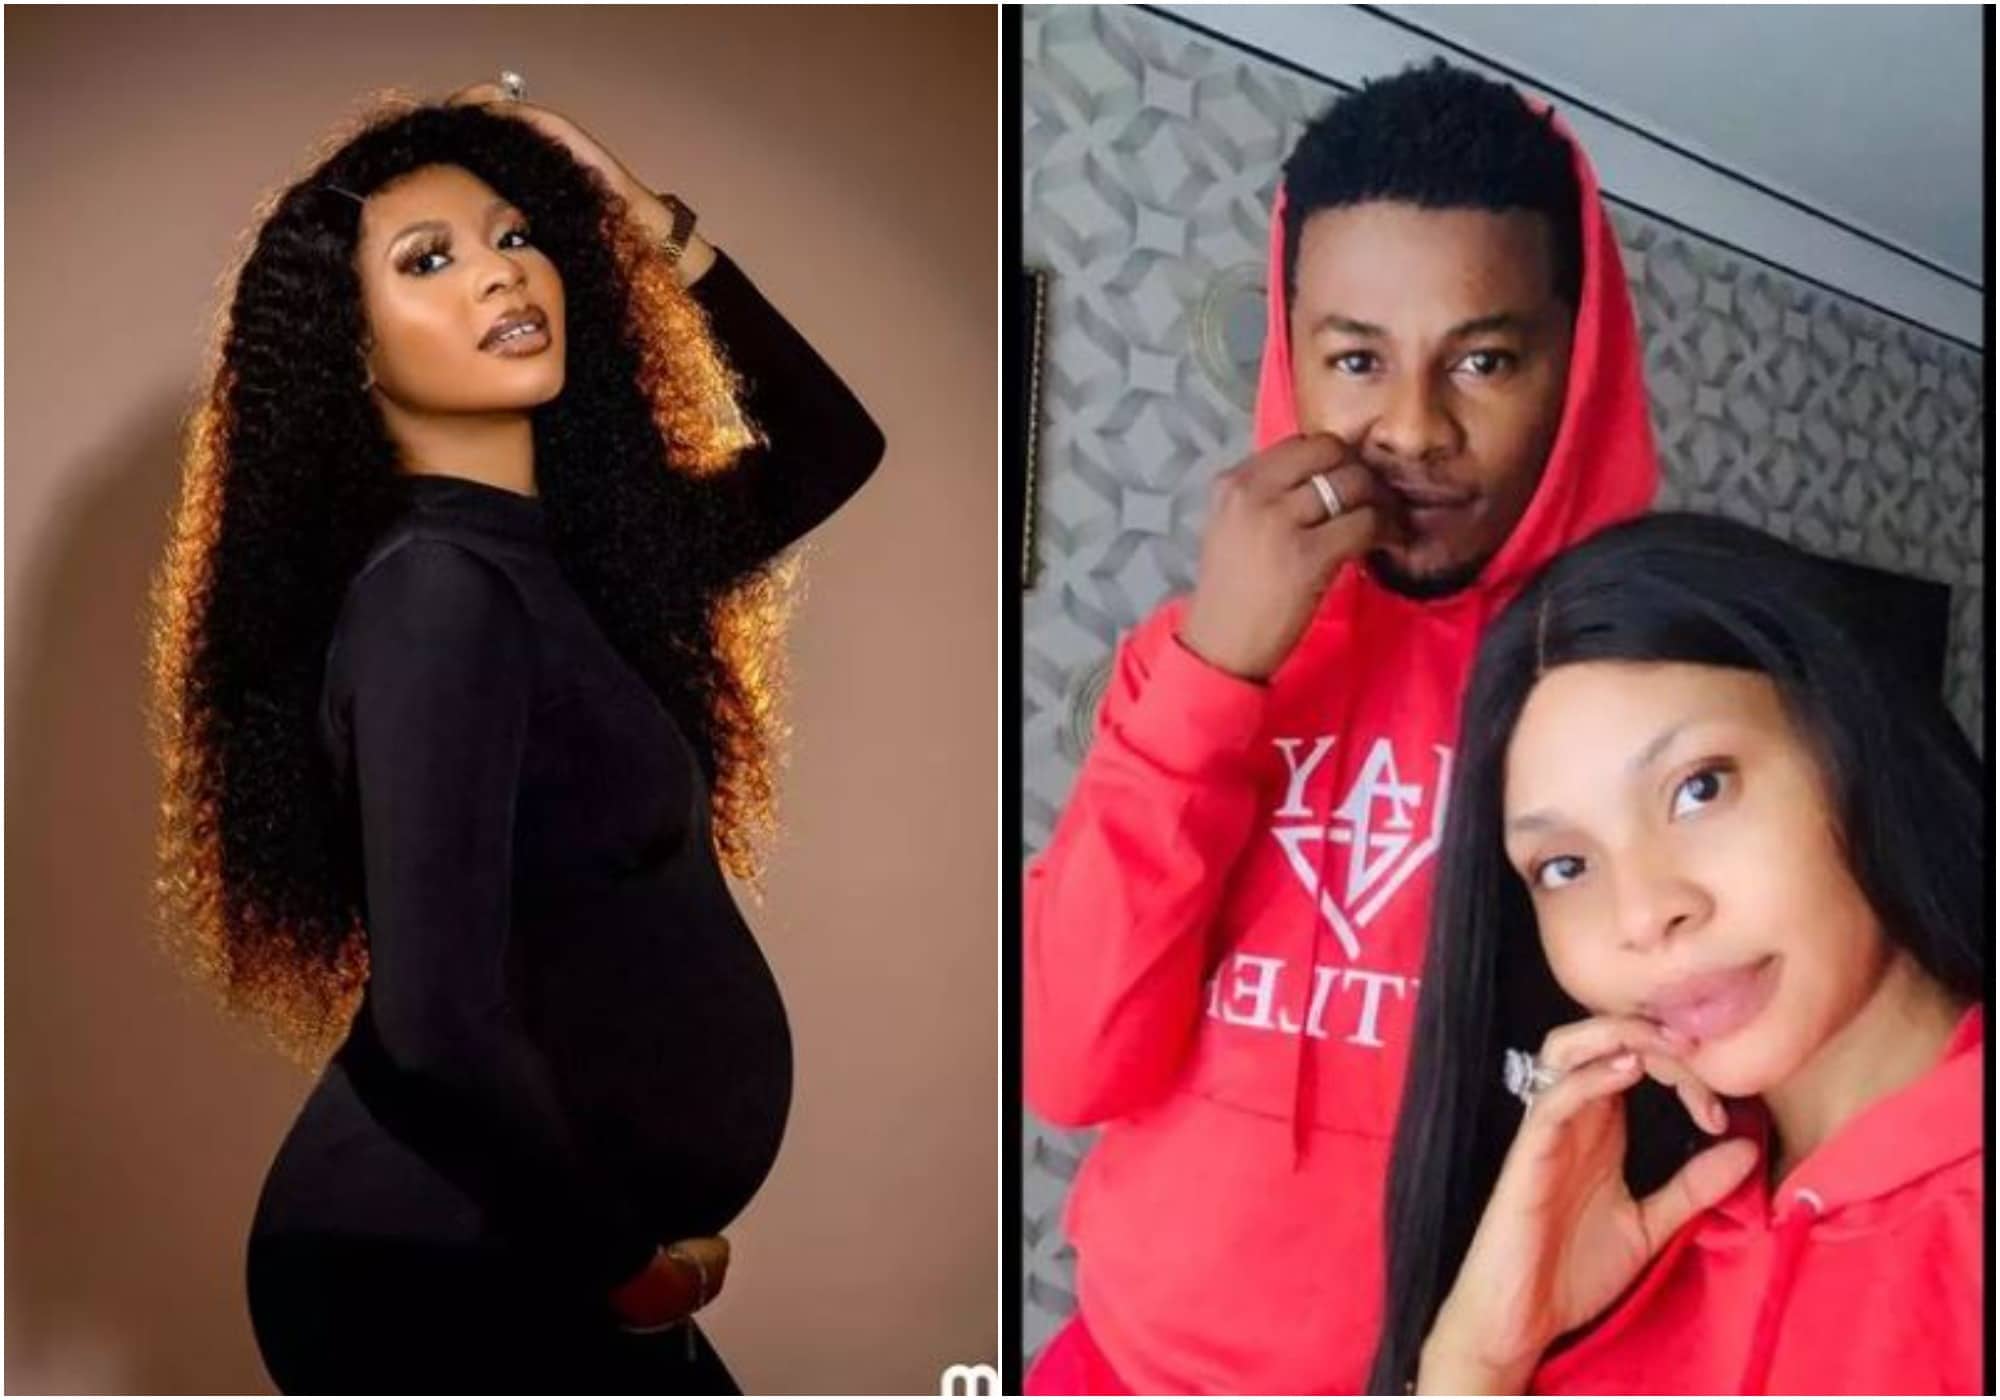 Actor Sam Ajibola and his wife welcome their first child, a baby boy